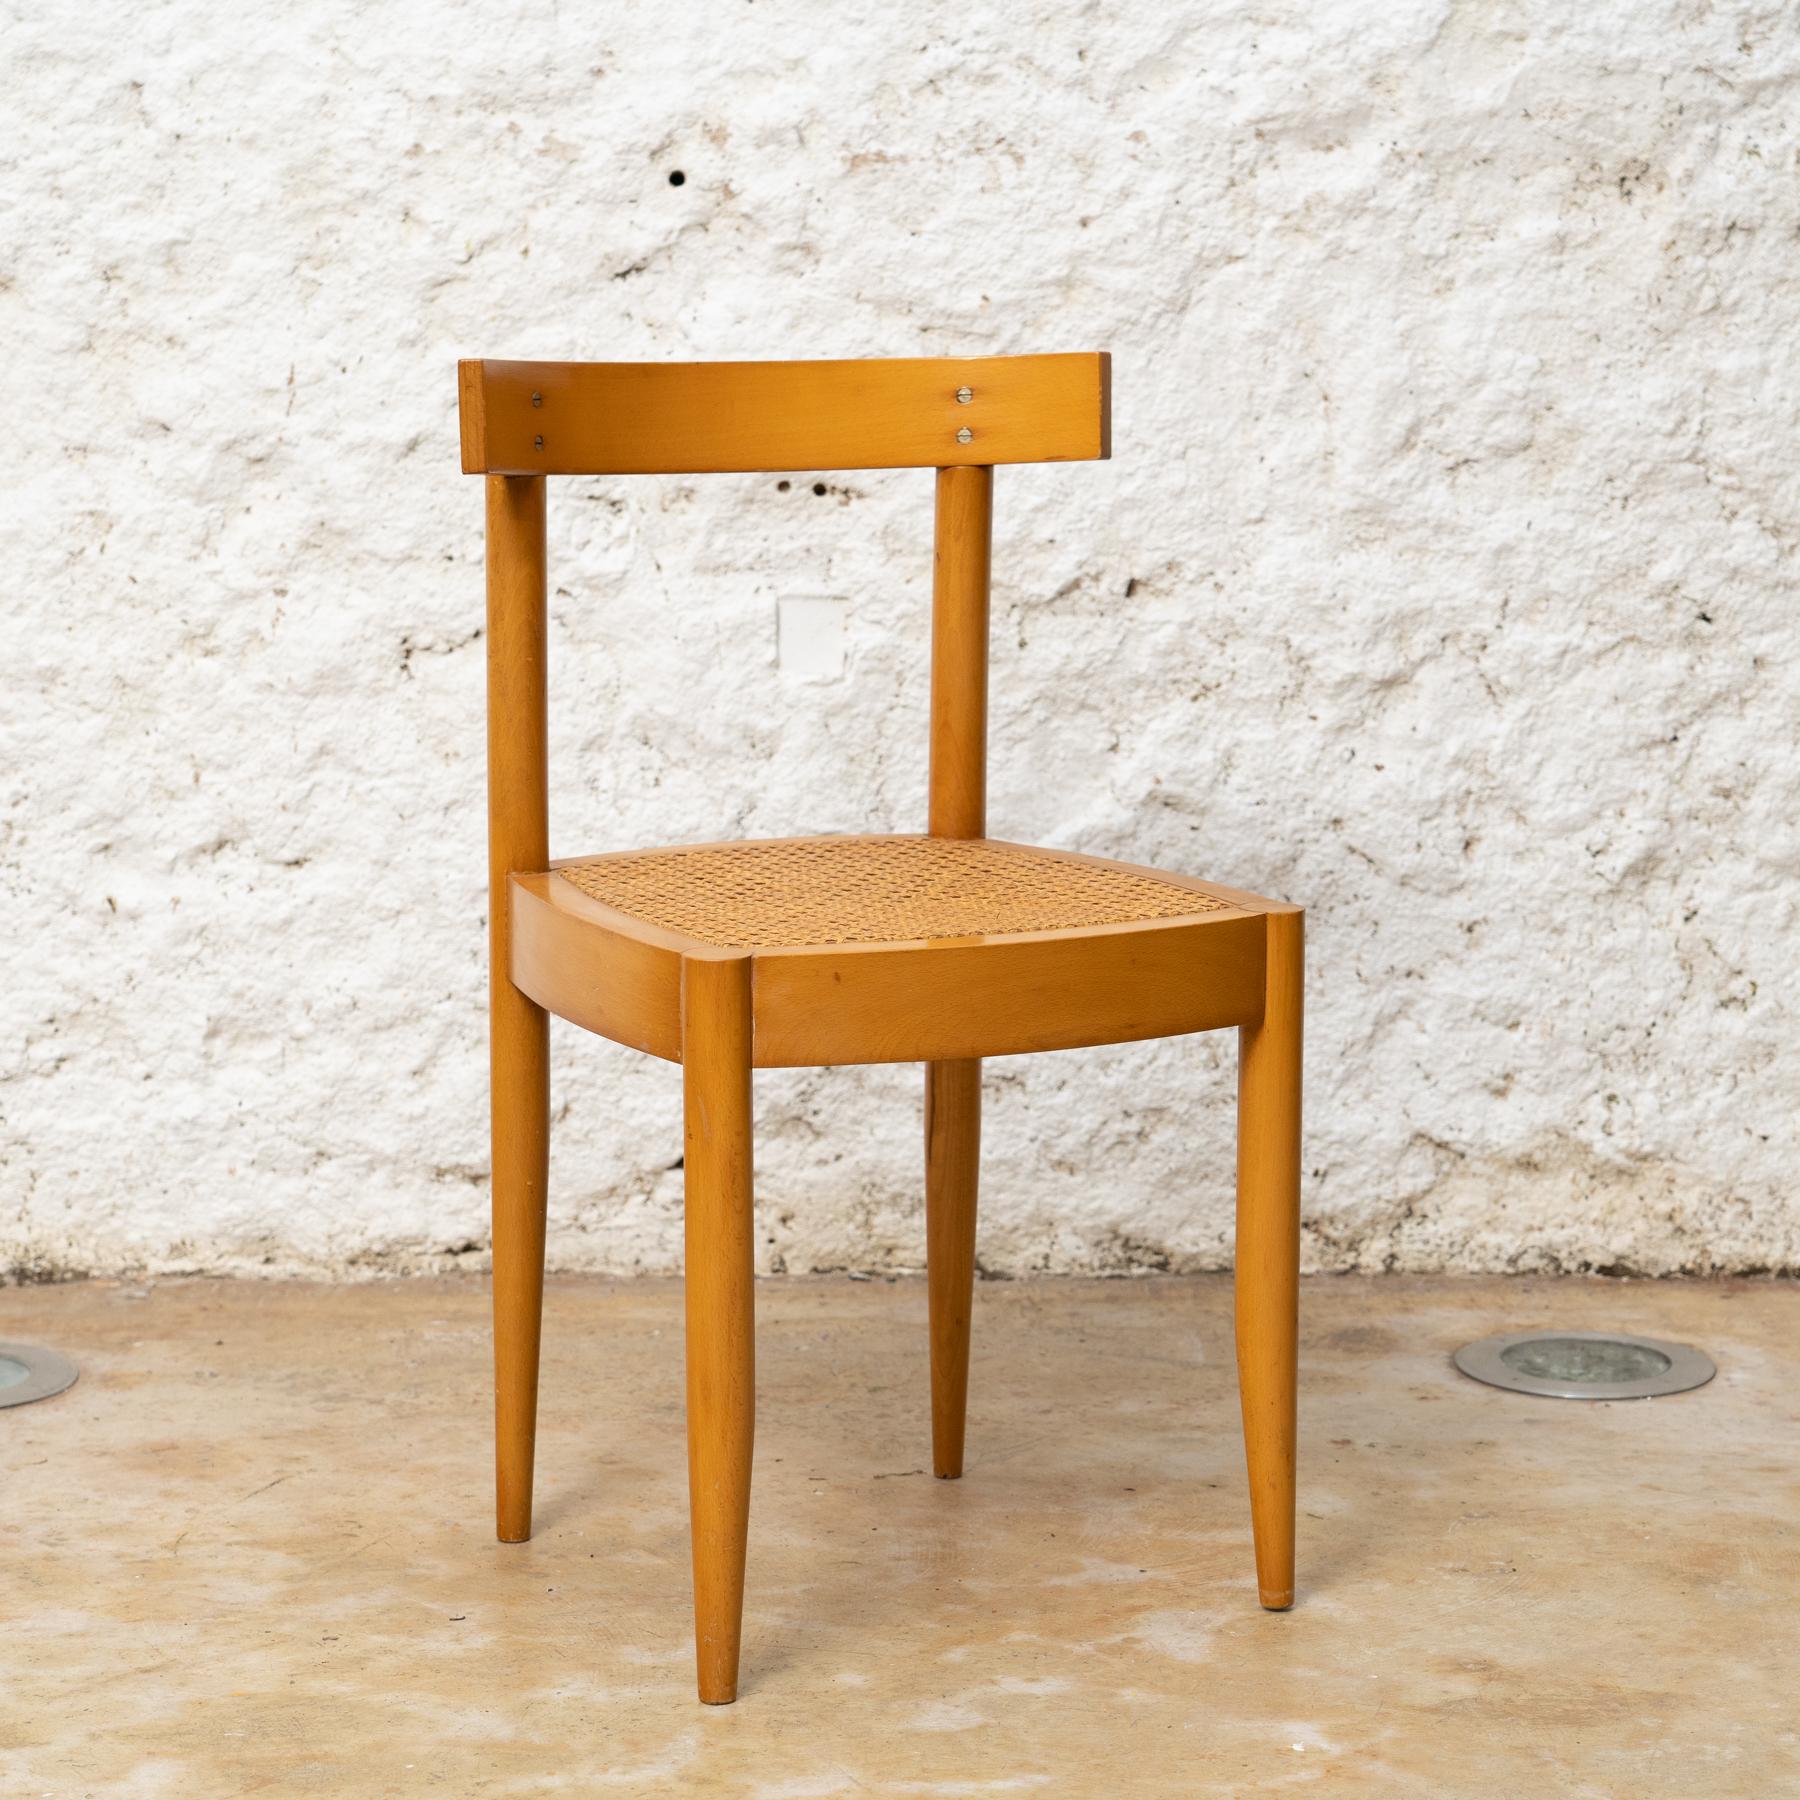     Designers: Federico Correa and Alfonso Milà
    Manufacturer: Gres, Spain
    Year: c. 1961
    Materials: Wood and Cane

Original Condition  Minor Wear  Beautiful Patina

The 'Reno' Chair, a collaborative creation by Federico Correa and Alfonso